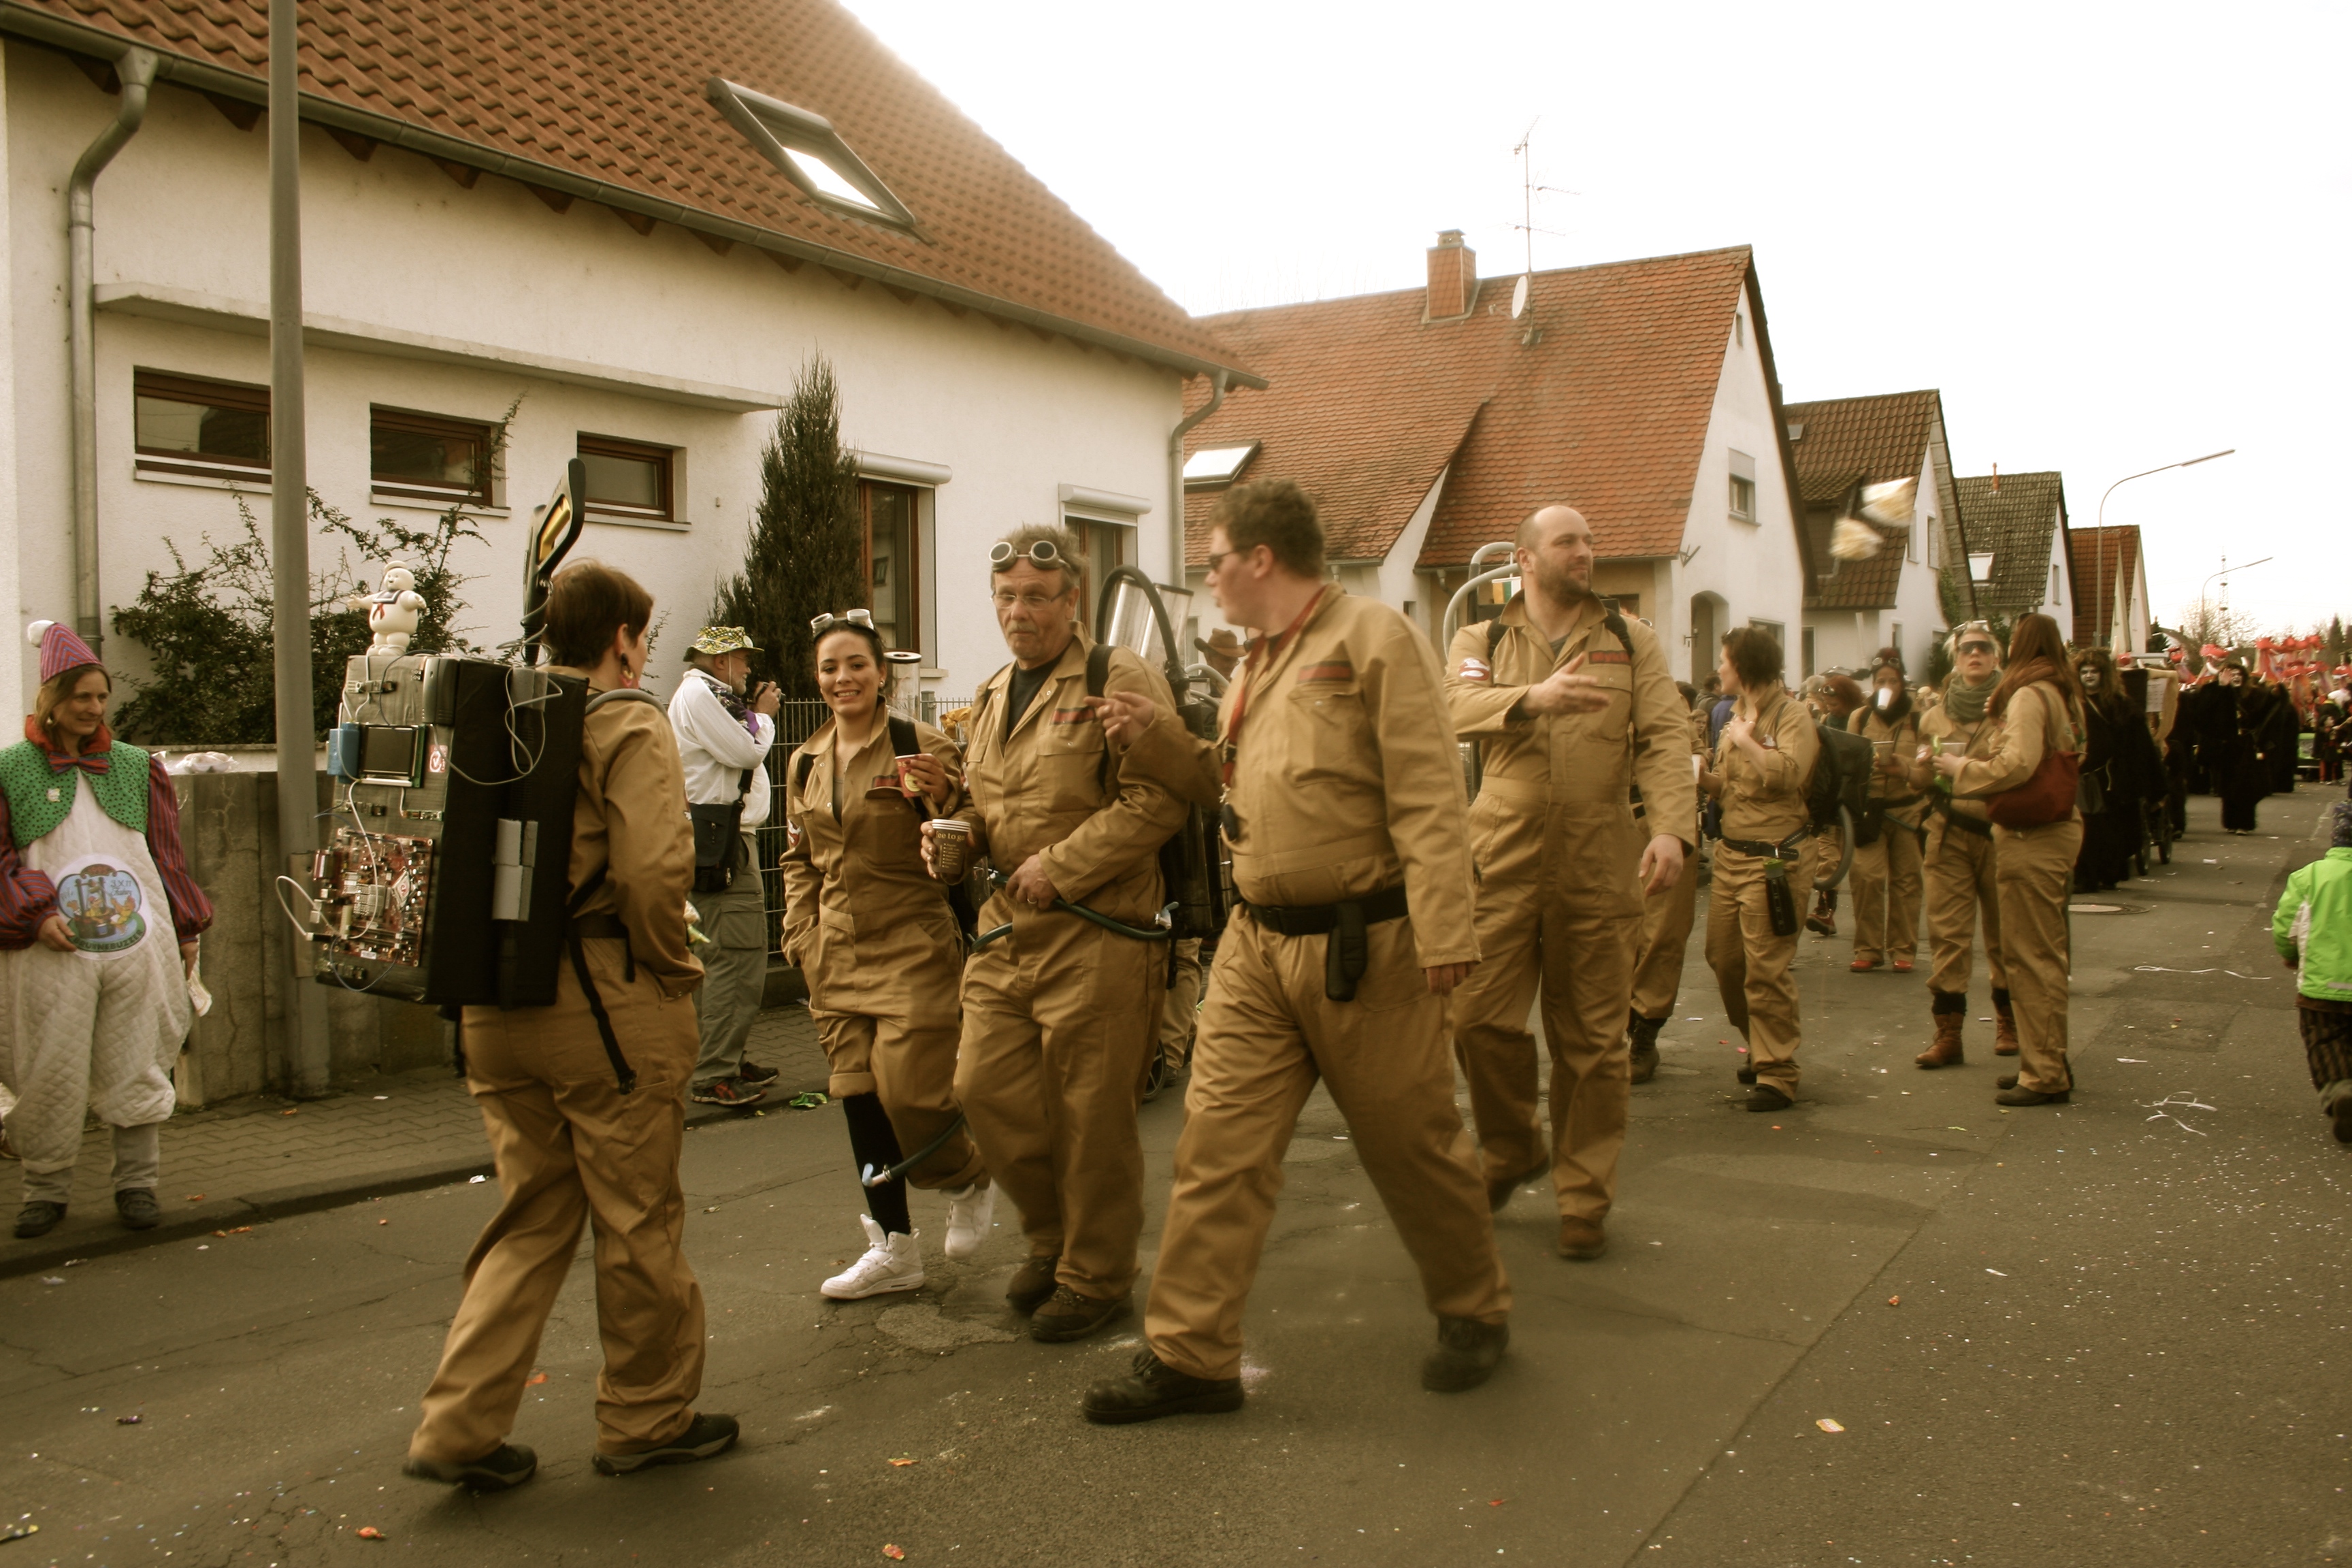 Holy Fasching Karneval 2014: early notes